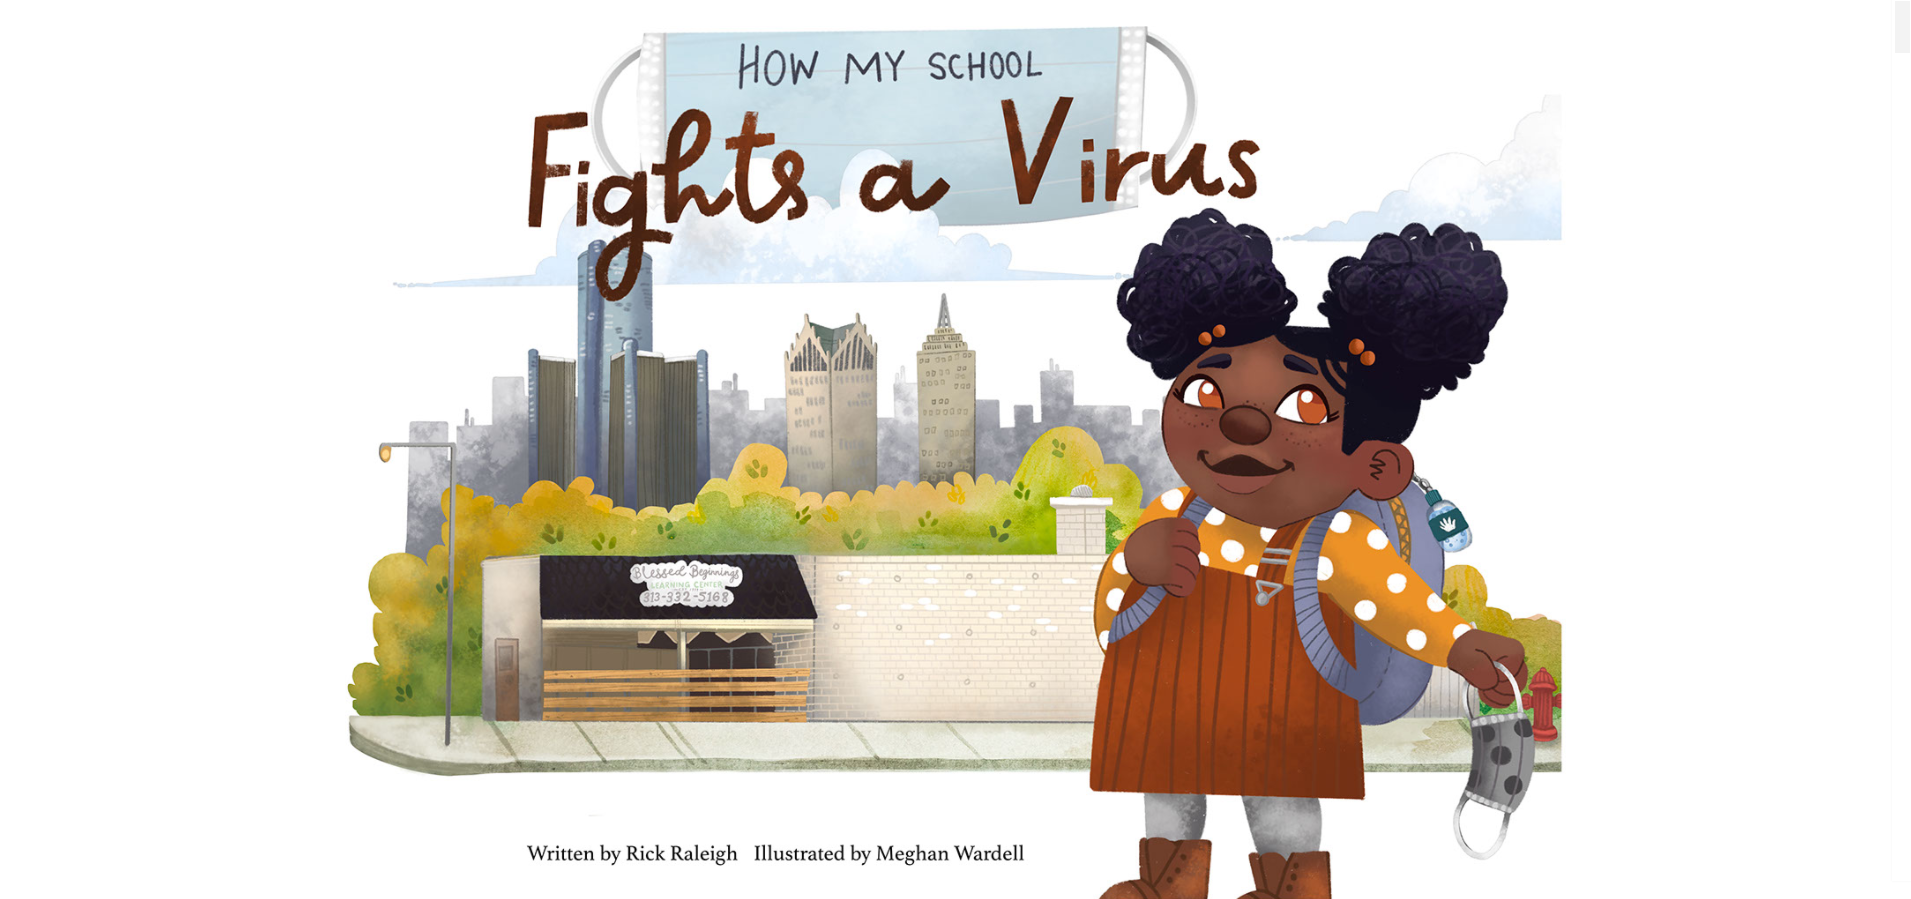 “How My School Fights a Virus:” IFF publishes children’s book with practical tips on returning to school